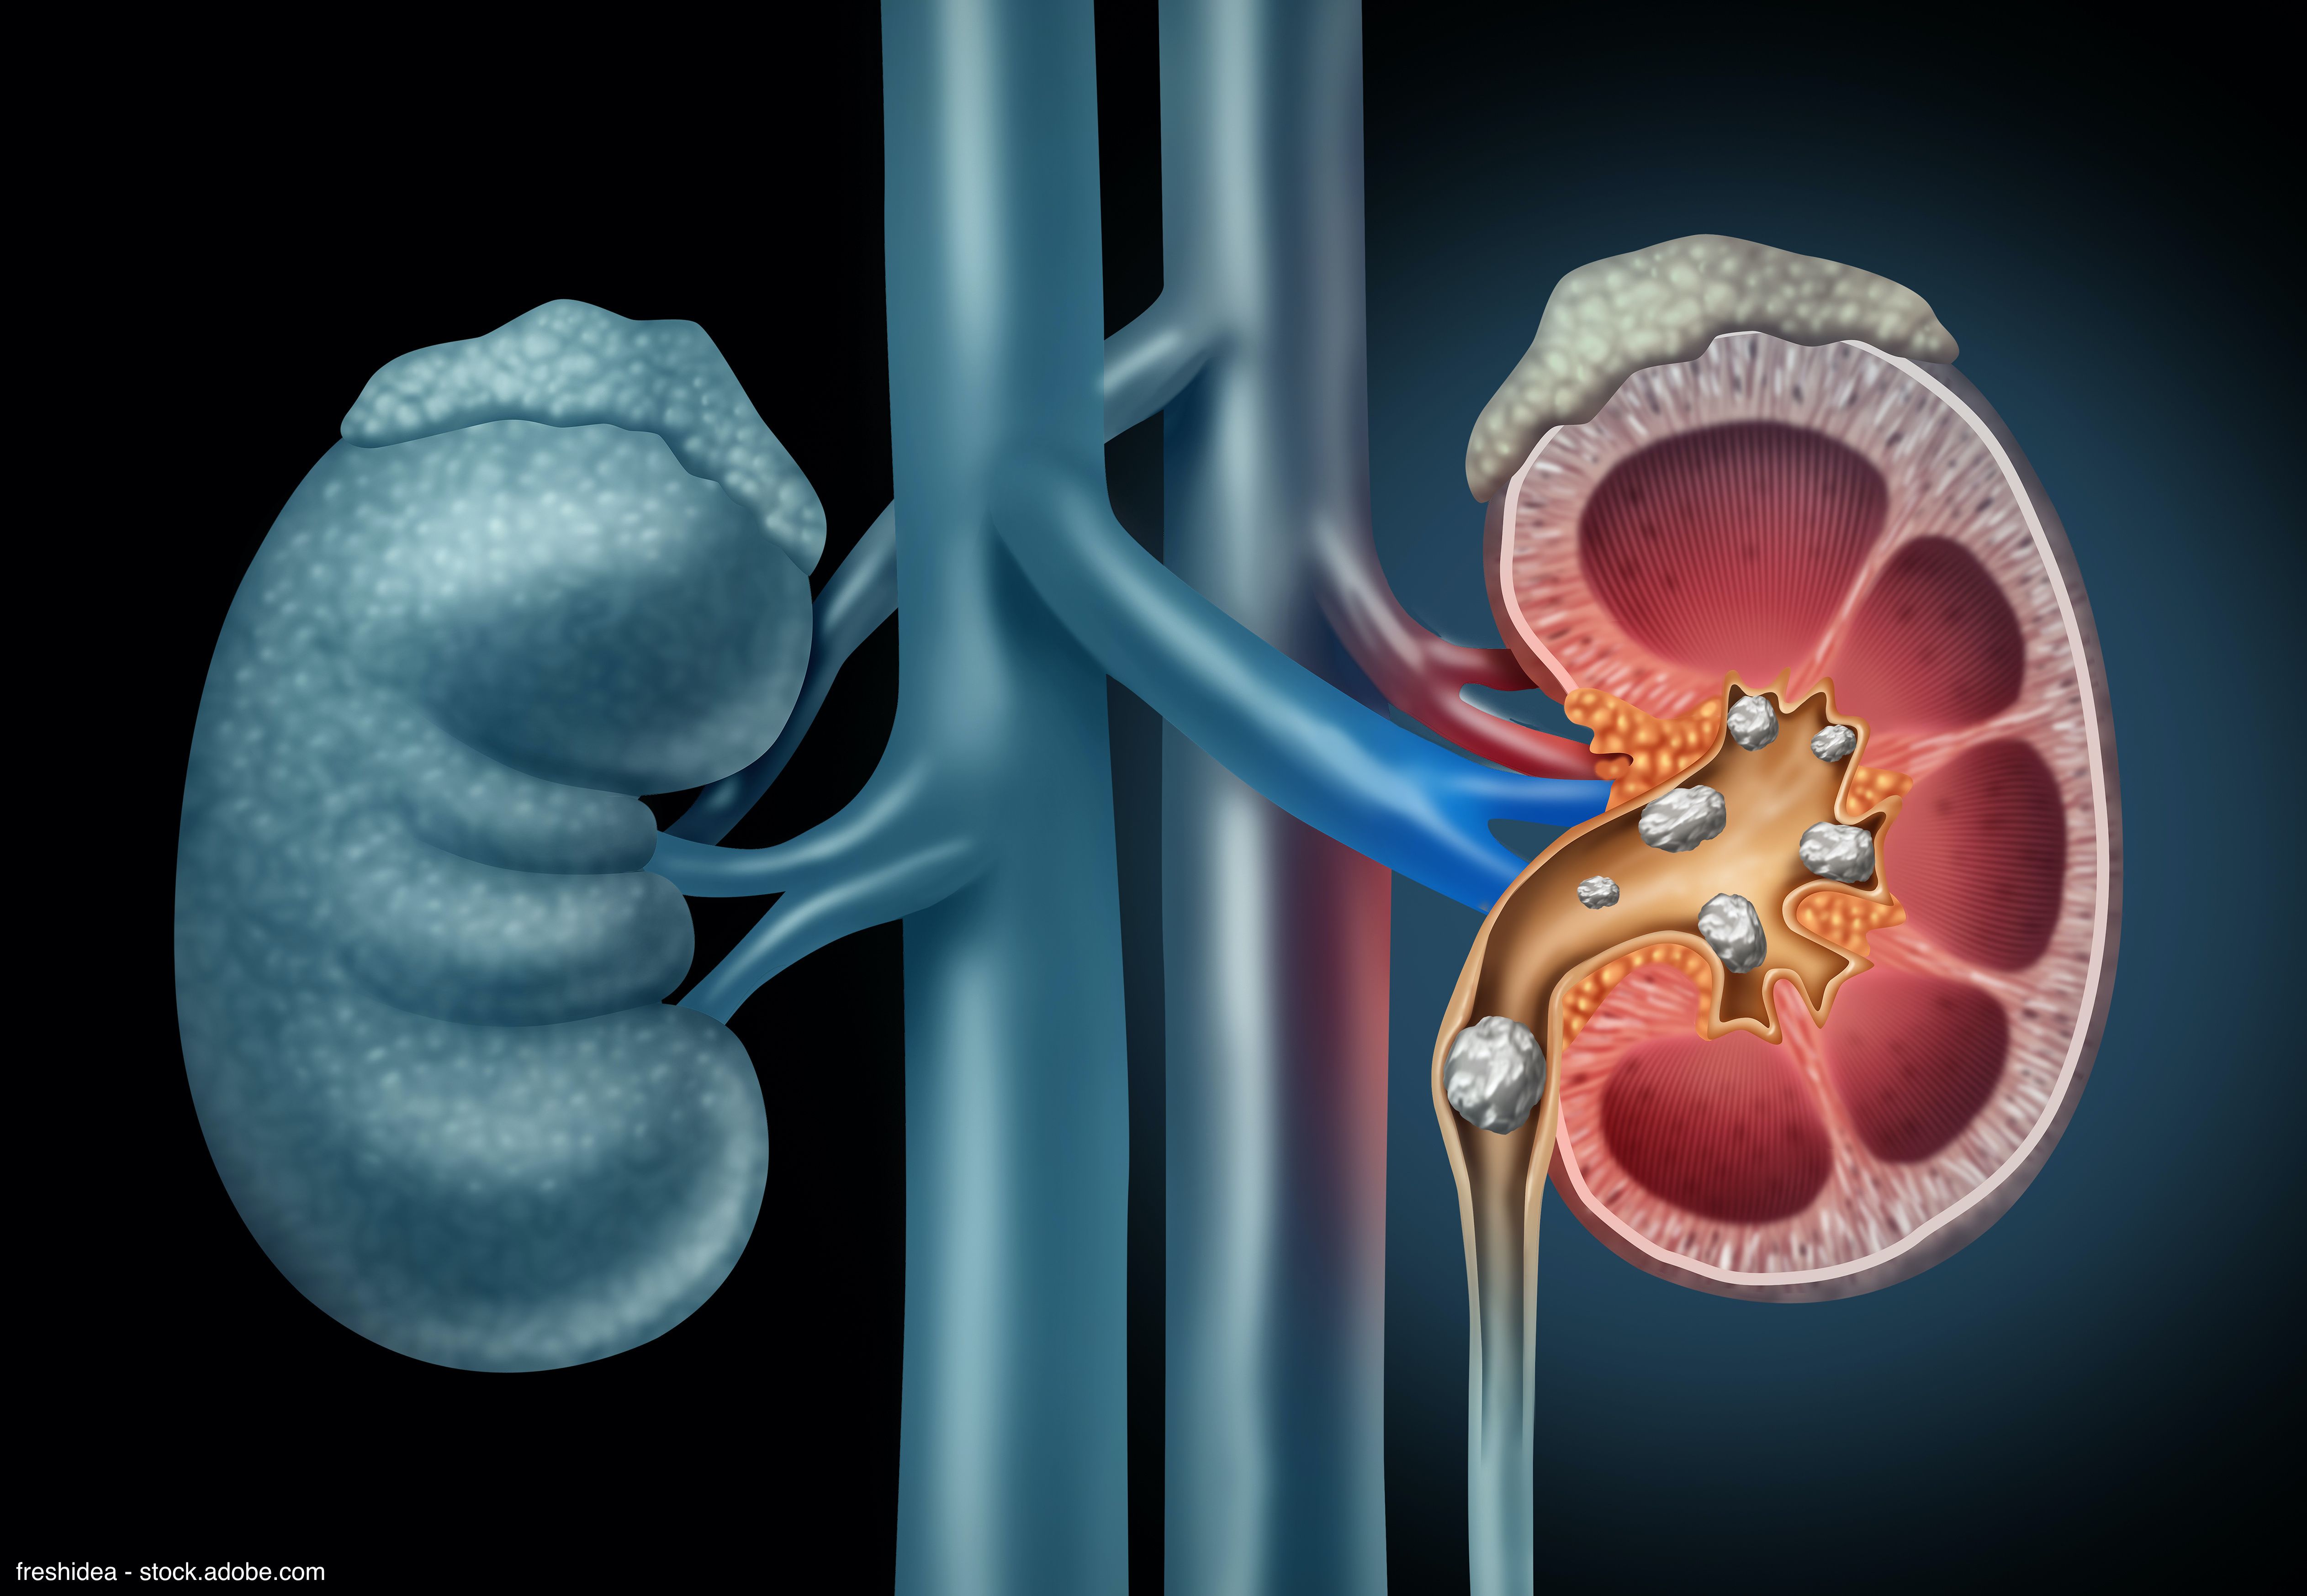 “In addition to potentially helping urologists achieve stone-free patients in a single procedure, this approach could help reduce the need for retreatment after kidney stone removal and decrease risks and complication rates,” said Jaime Landman, MD.